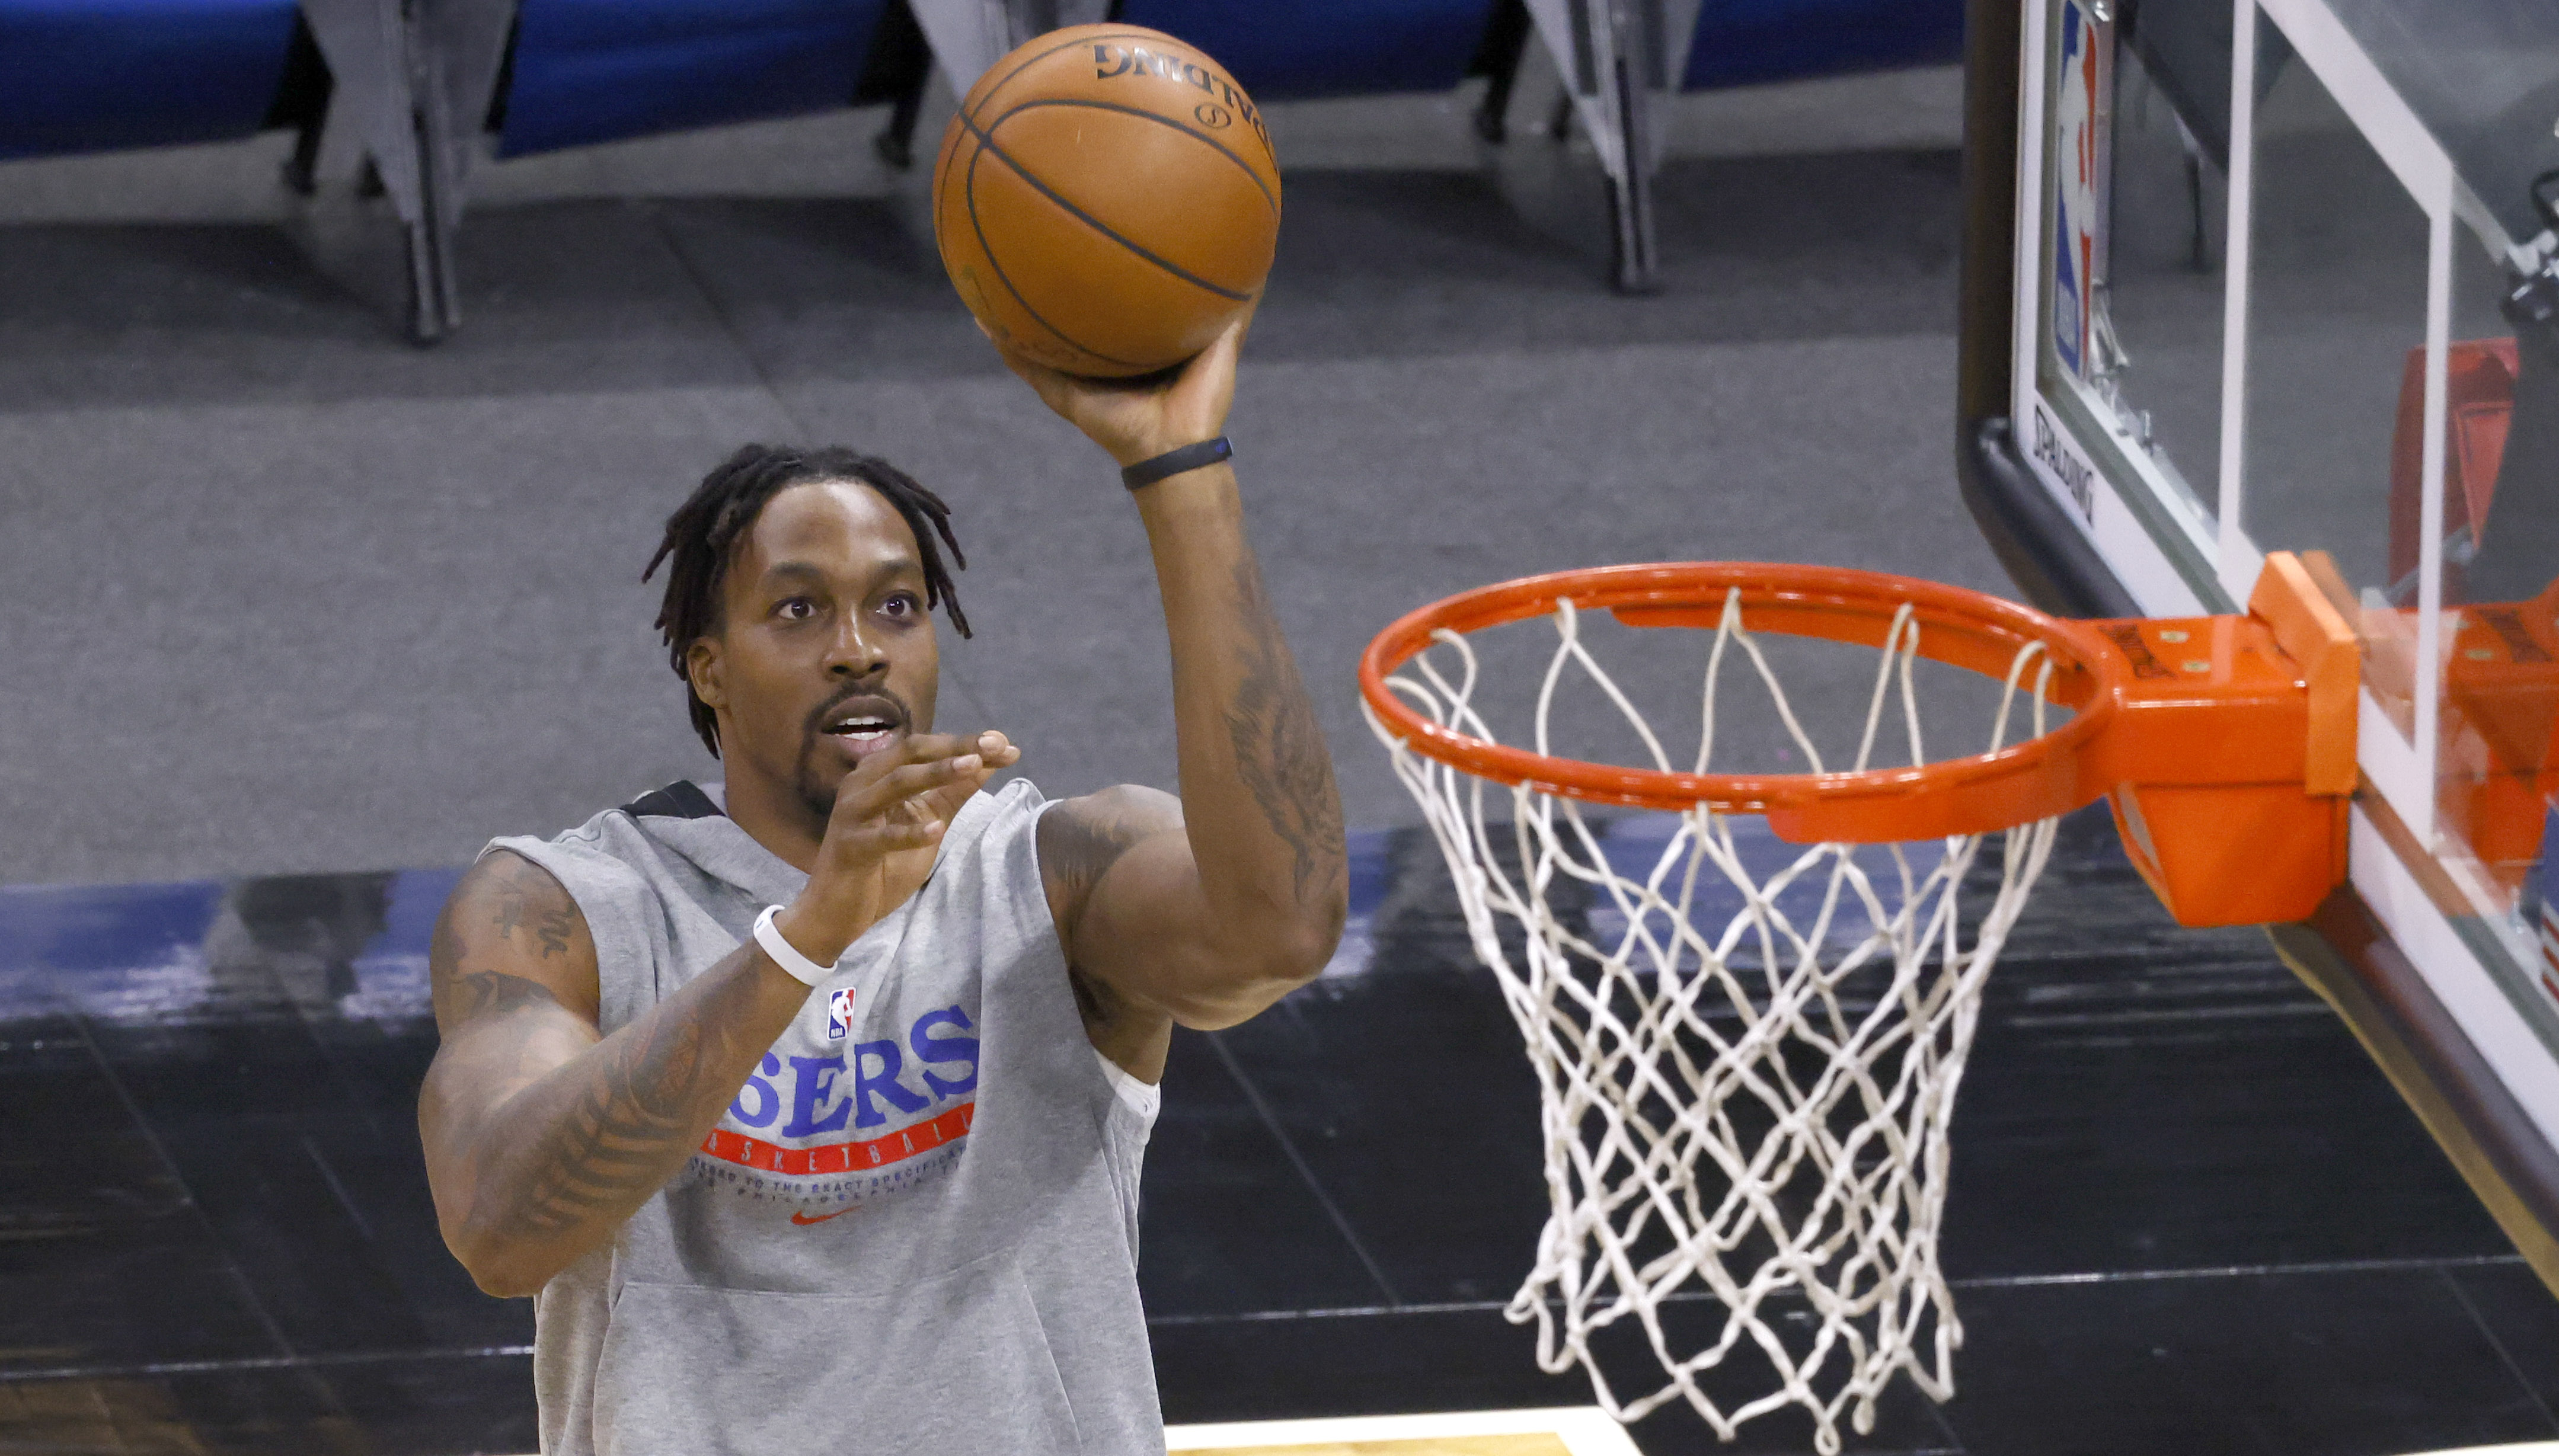 Dec 31, 2020; Orlando, Florida, USA; Philadelphia 76ers center Dwight Howard (39) shoots the ball during warmups before the game against the Orlando Magic at Amway Center. Mandatory Credit: Reinhold Matay-USA TODAY Sports